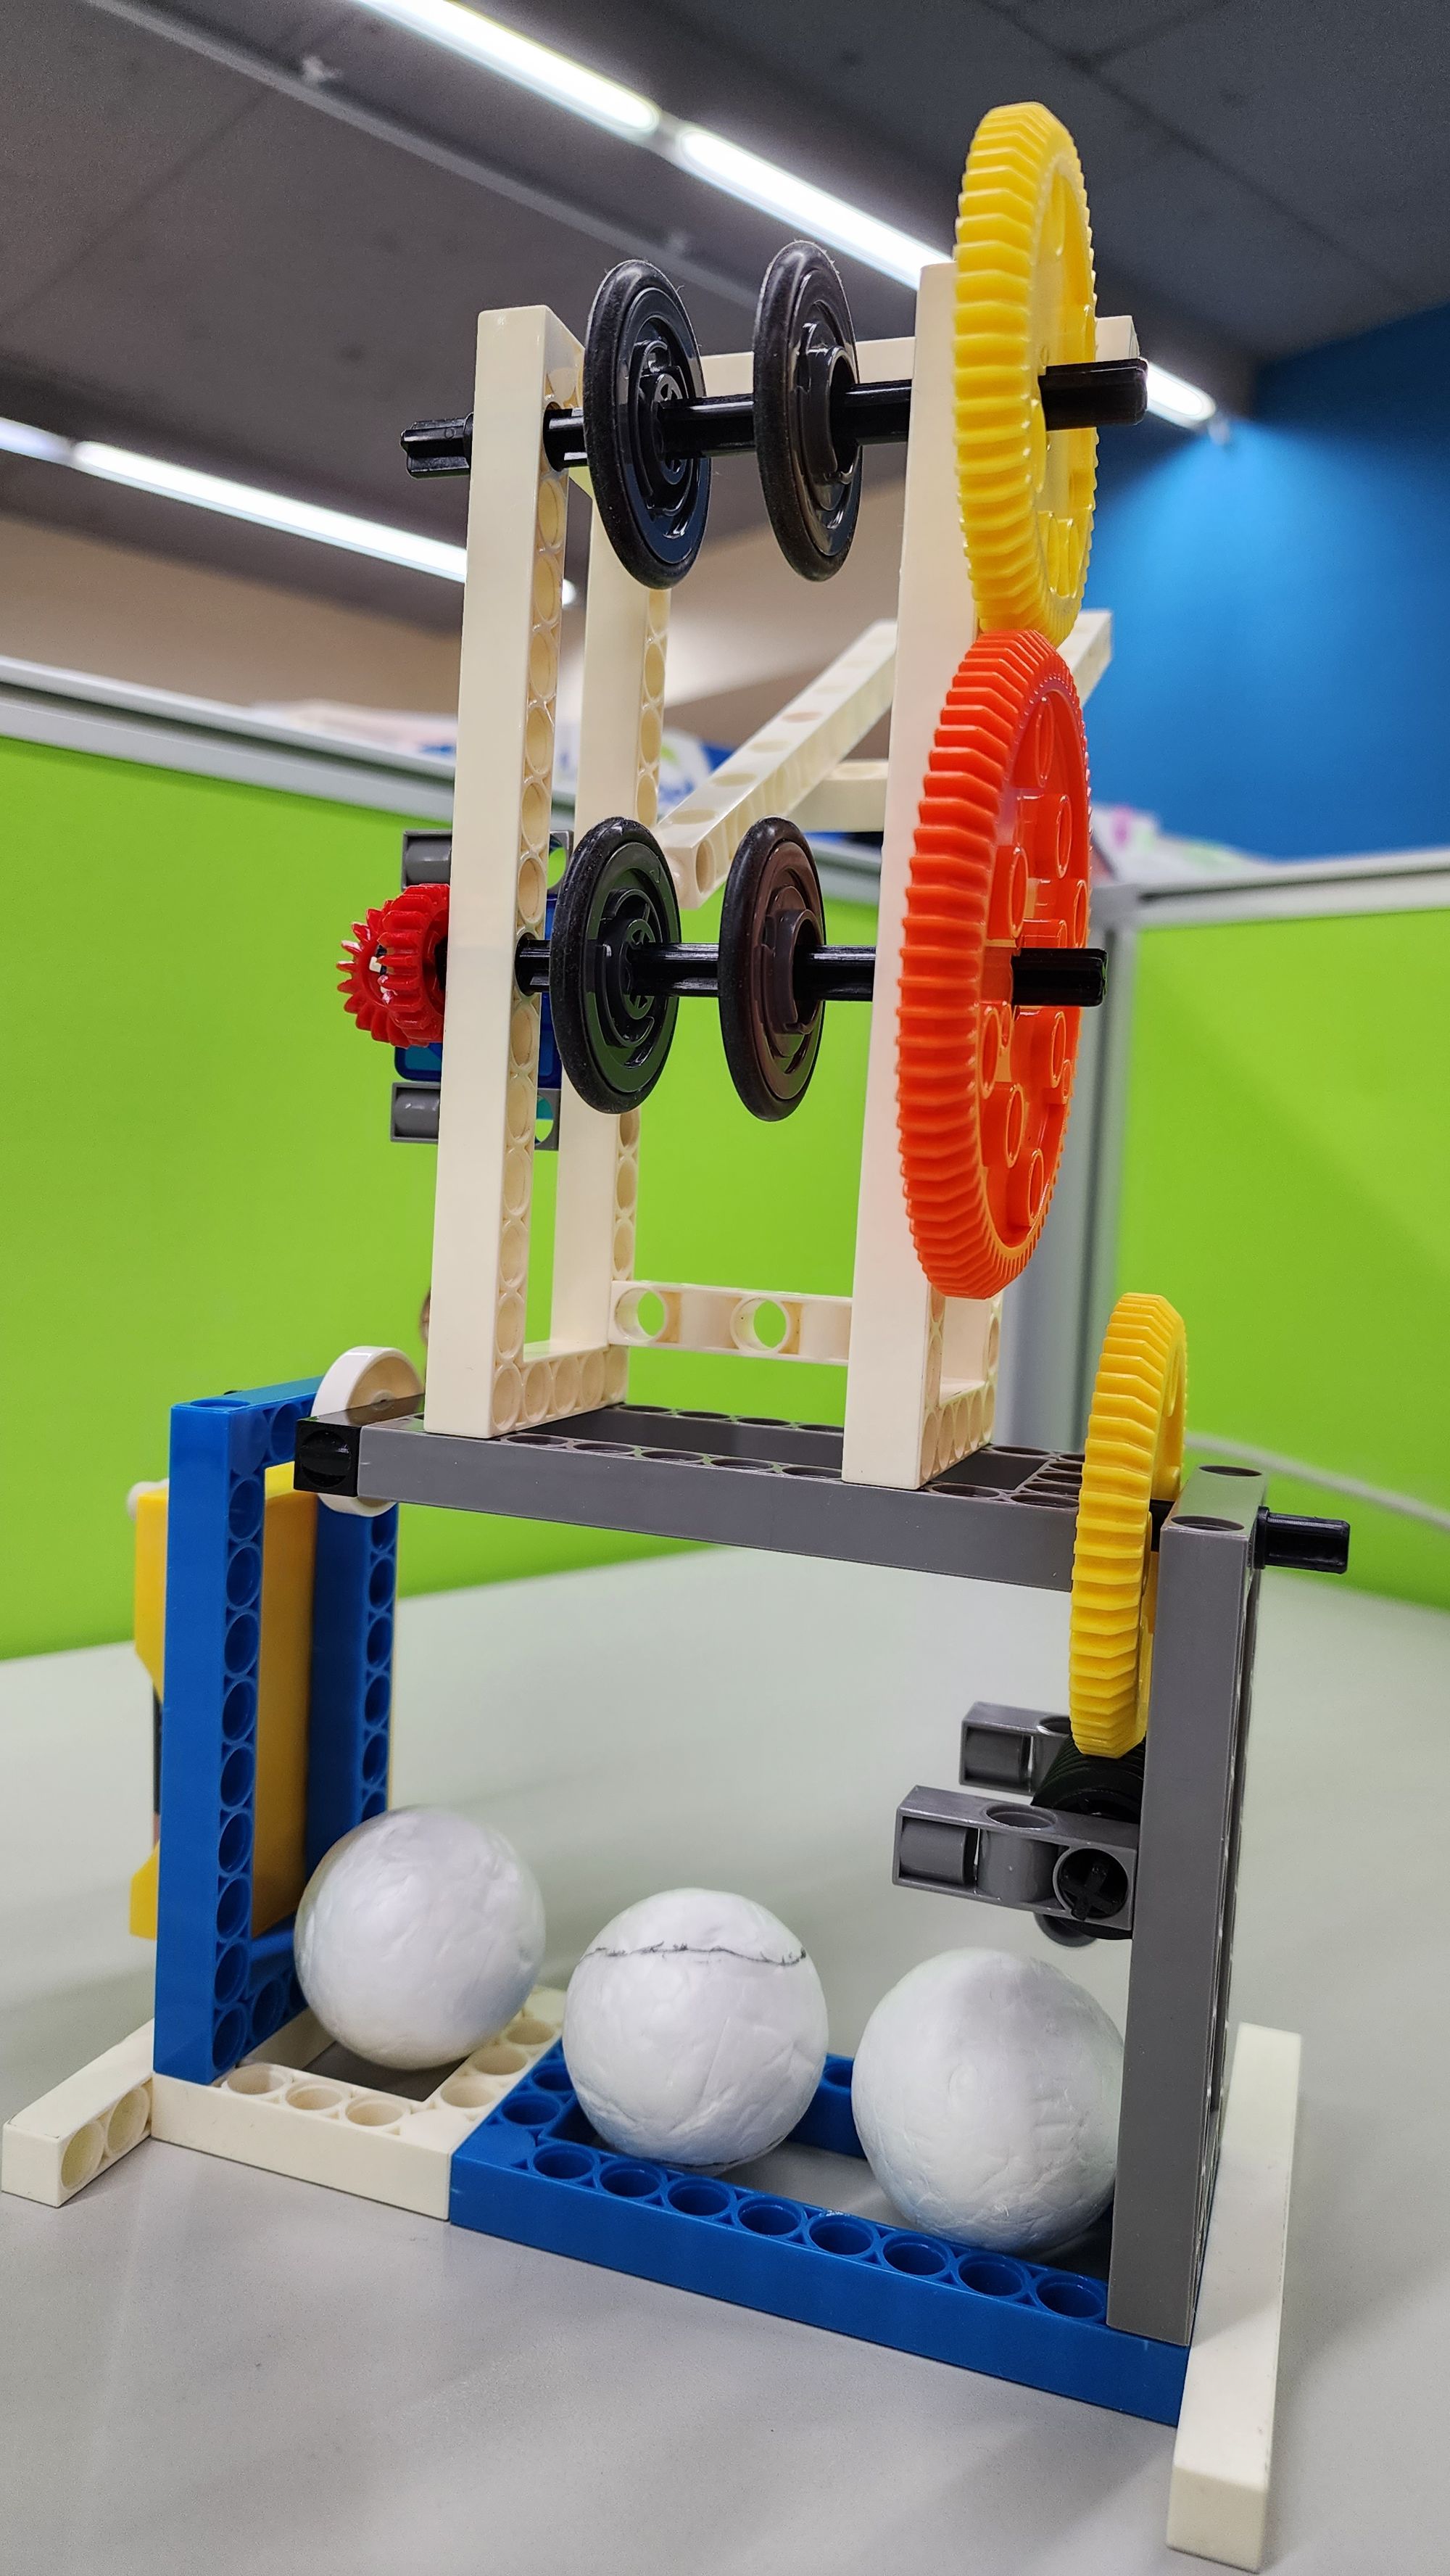 Science in daily life: EP11 – Two-Roller Pitching Machine